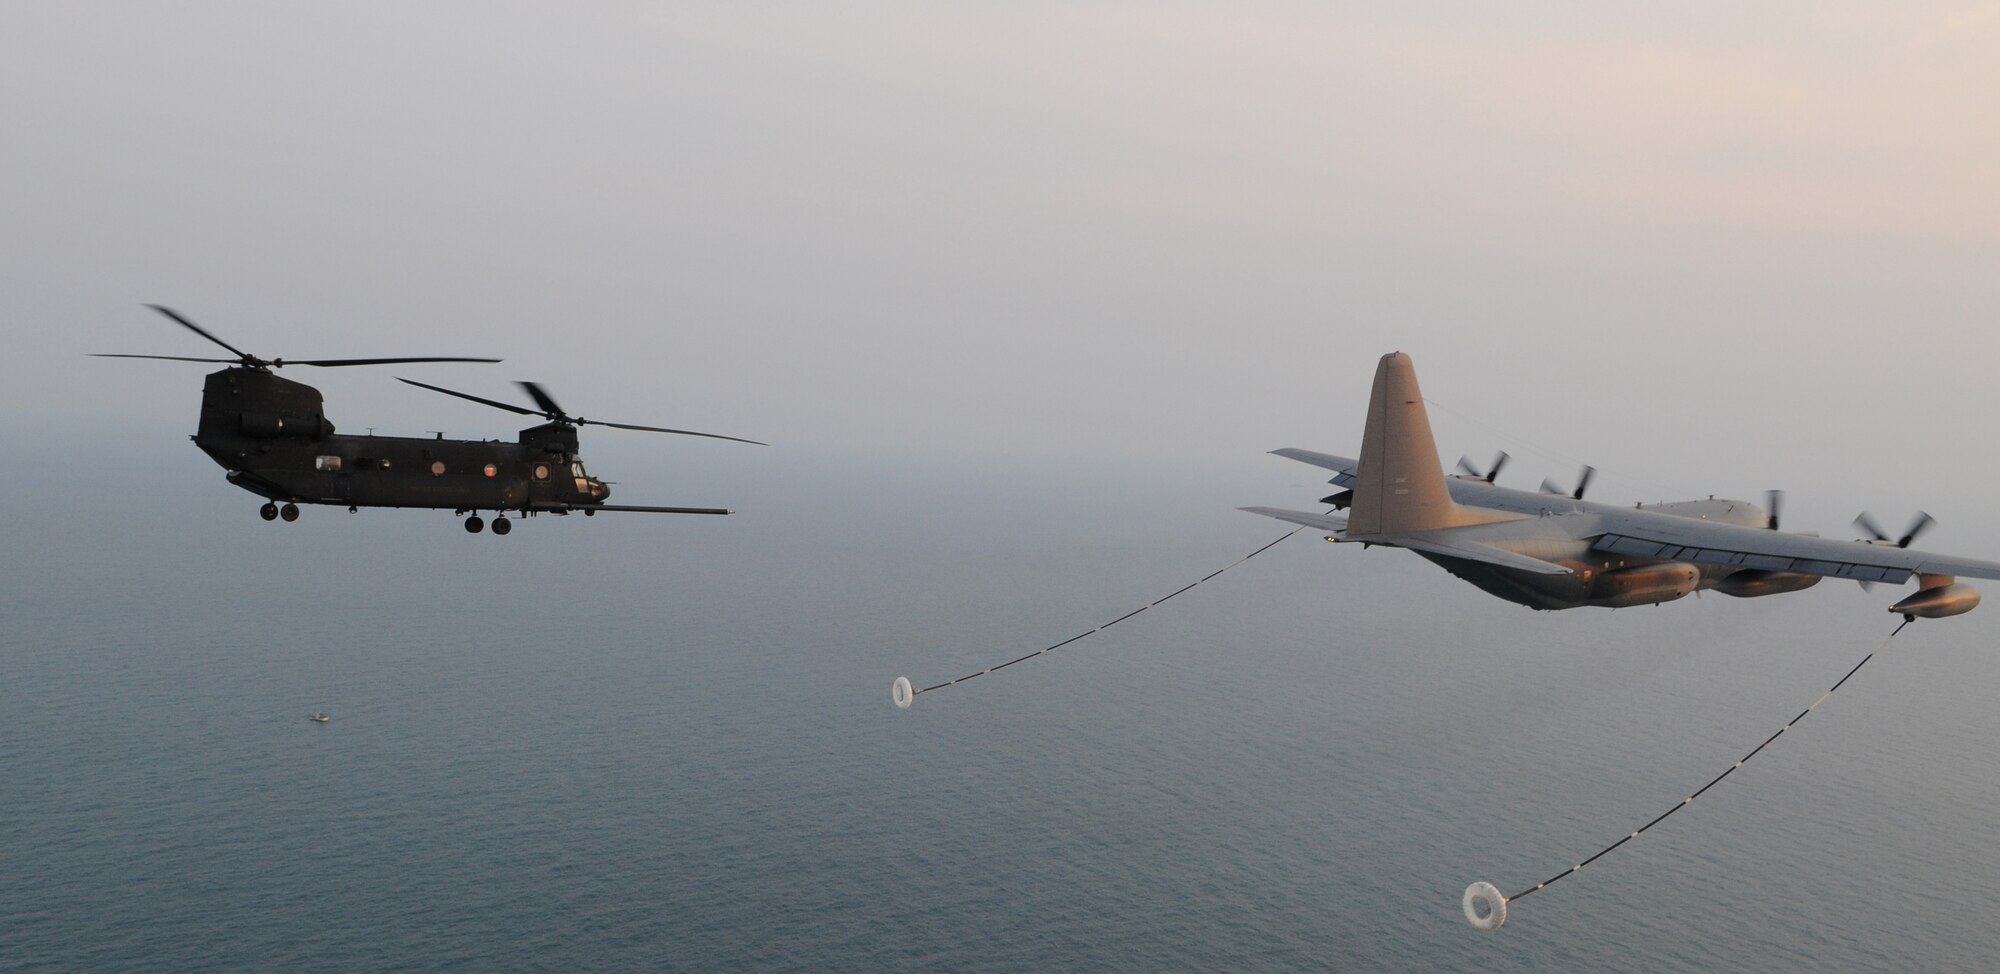 OVER THE REPUBLIC OF KOREA -- A U.S. Army MH-47 helicopter from the 160th Special Operations Aviation Regiment (Airborne) lines up to refuel from a 17th Special Operations Squadron MC-130P Combat Shadow during a training mission here March 30 during Foal Eagle 2009.  Foal Eagle is an annual combined training exercise for U.S. and Republic of Korea forces to evaluate and improve their ability to coordinate procedures, plans and systems necessary to defend the ROK. The 17th SOS is deployed from Kadena Air Base, Japan, and the 160th SOAR is deployed from Fort Lewis, Wash. (U.S. Air Force photo by Tech. Sgt. Aaron Cram)